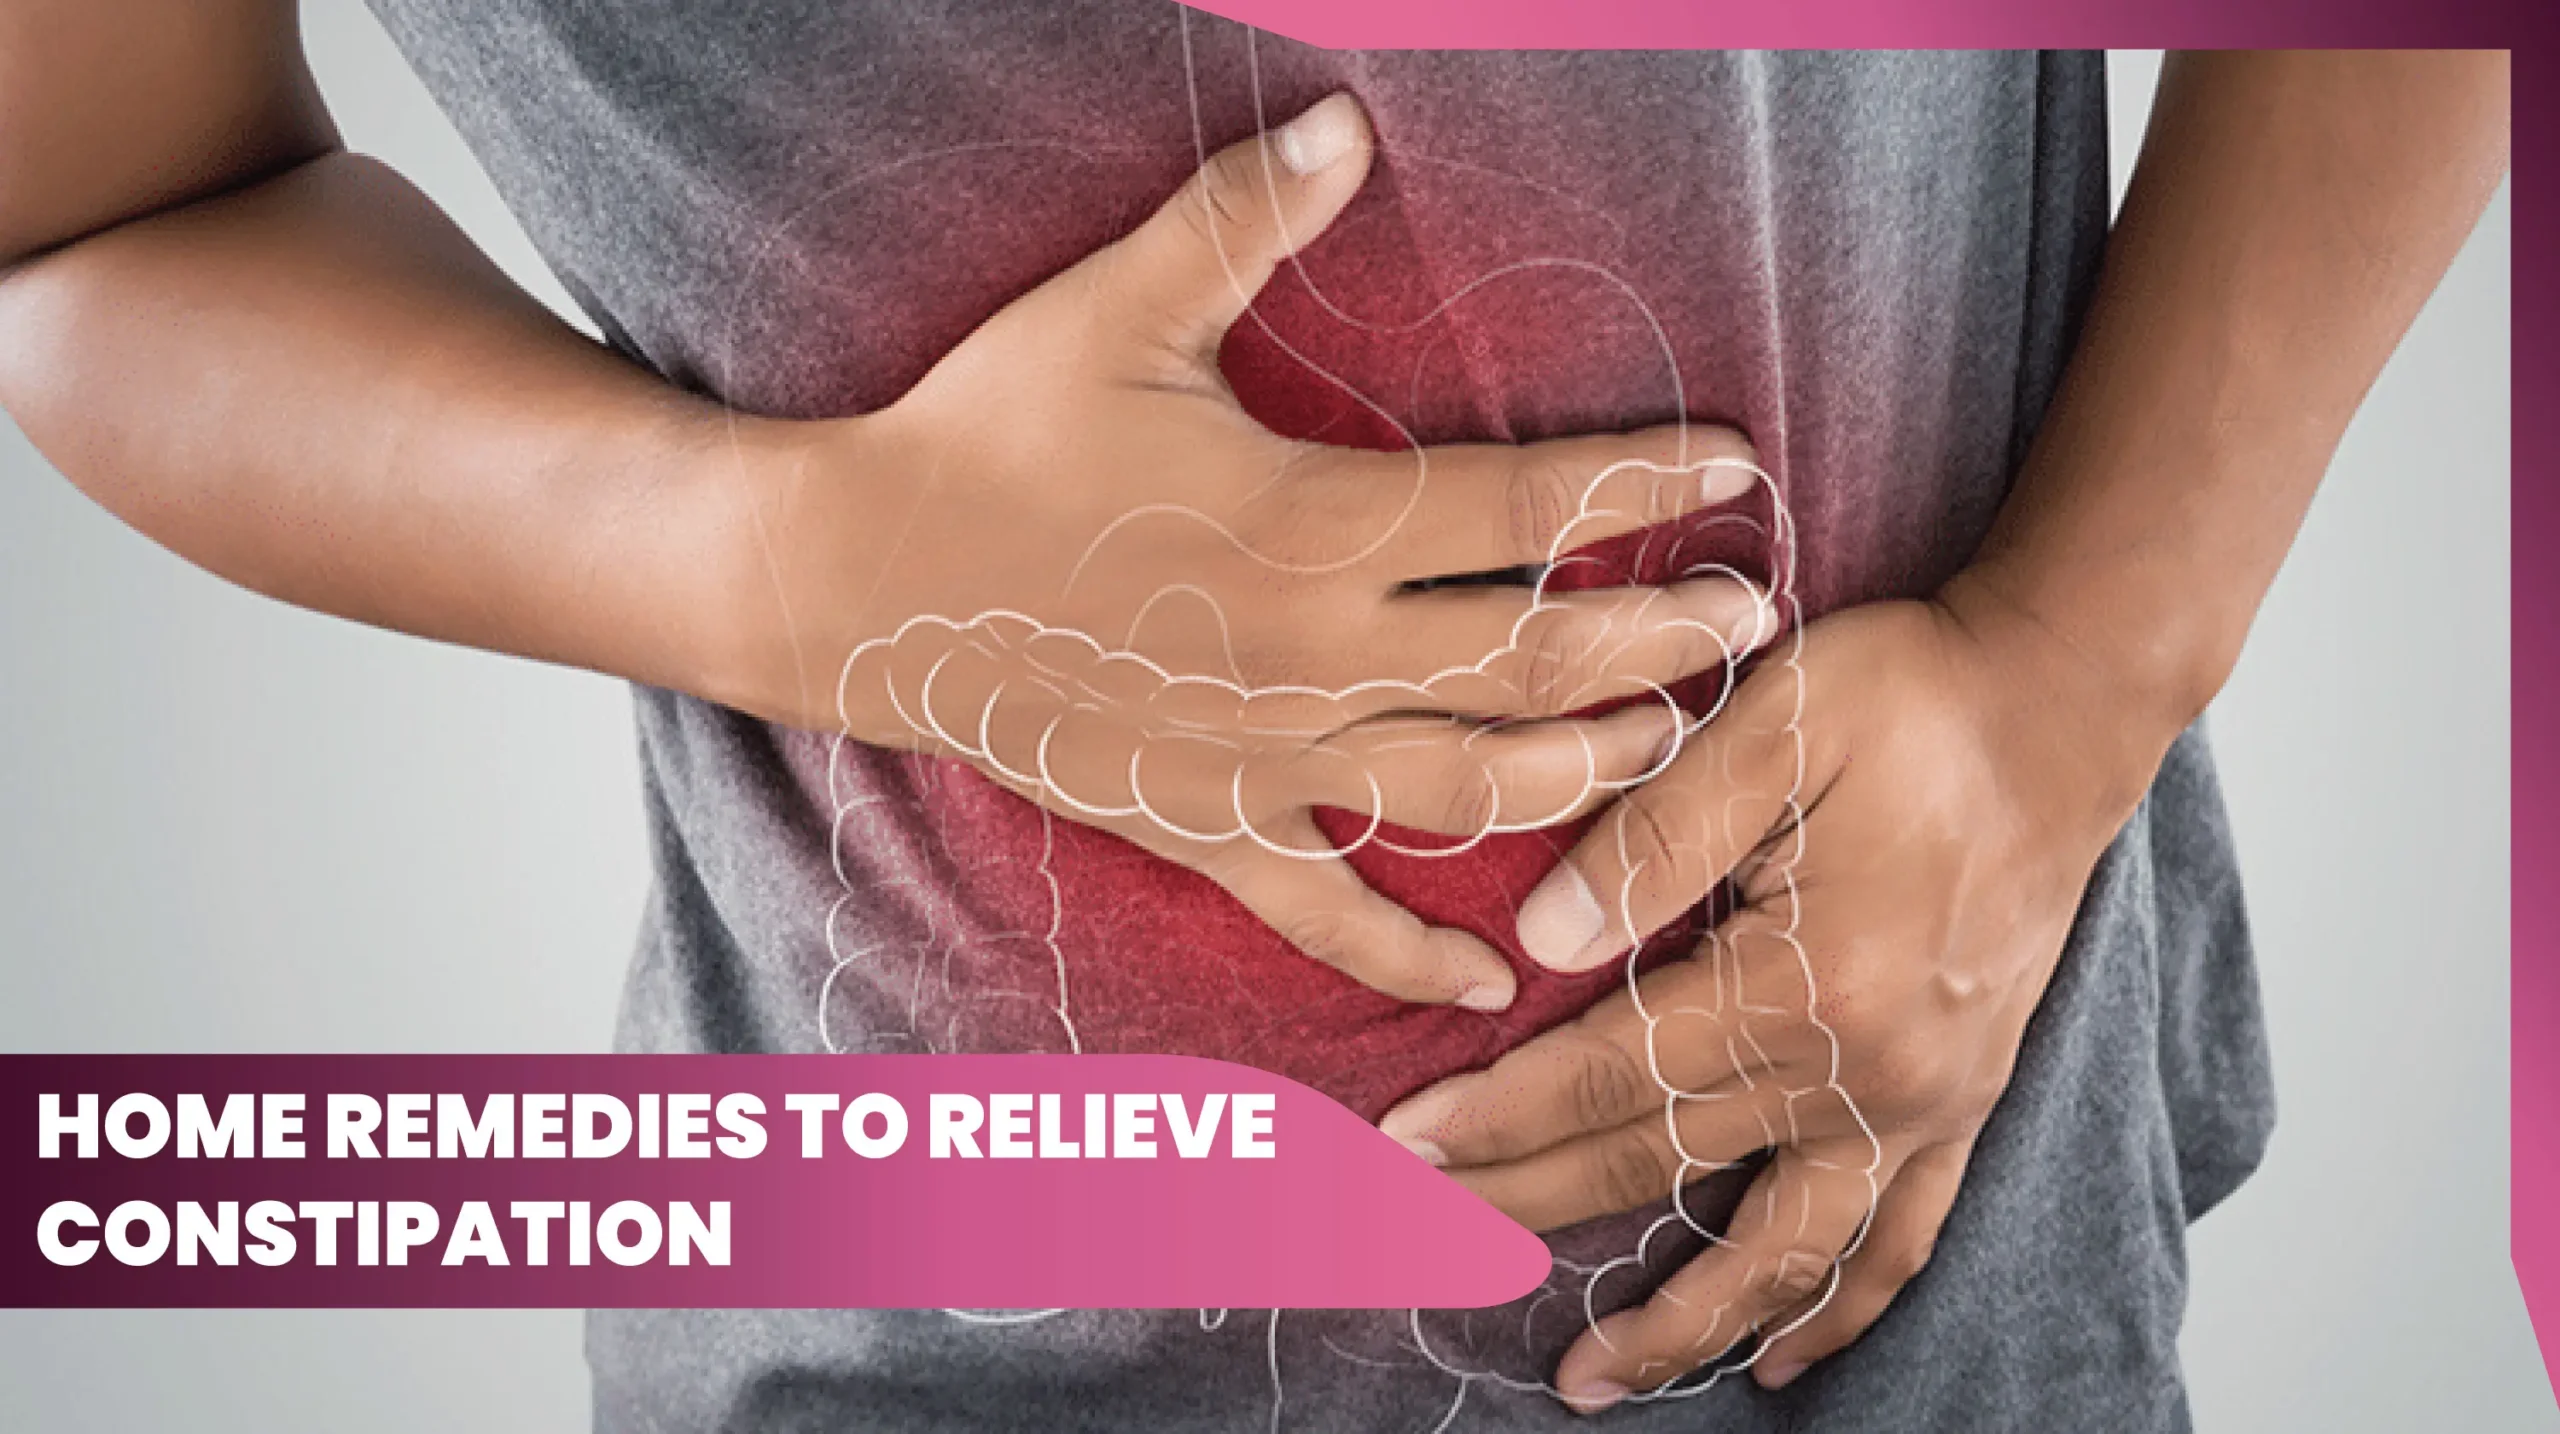 11foods and home remedies to relieve constipation